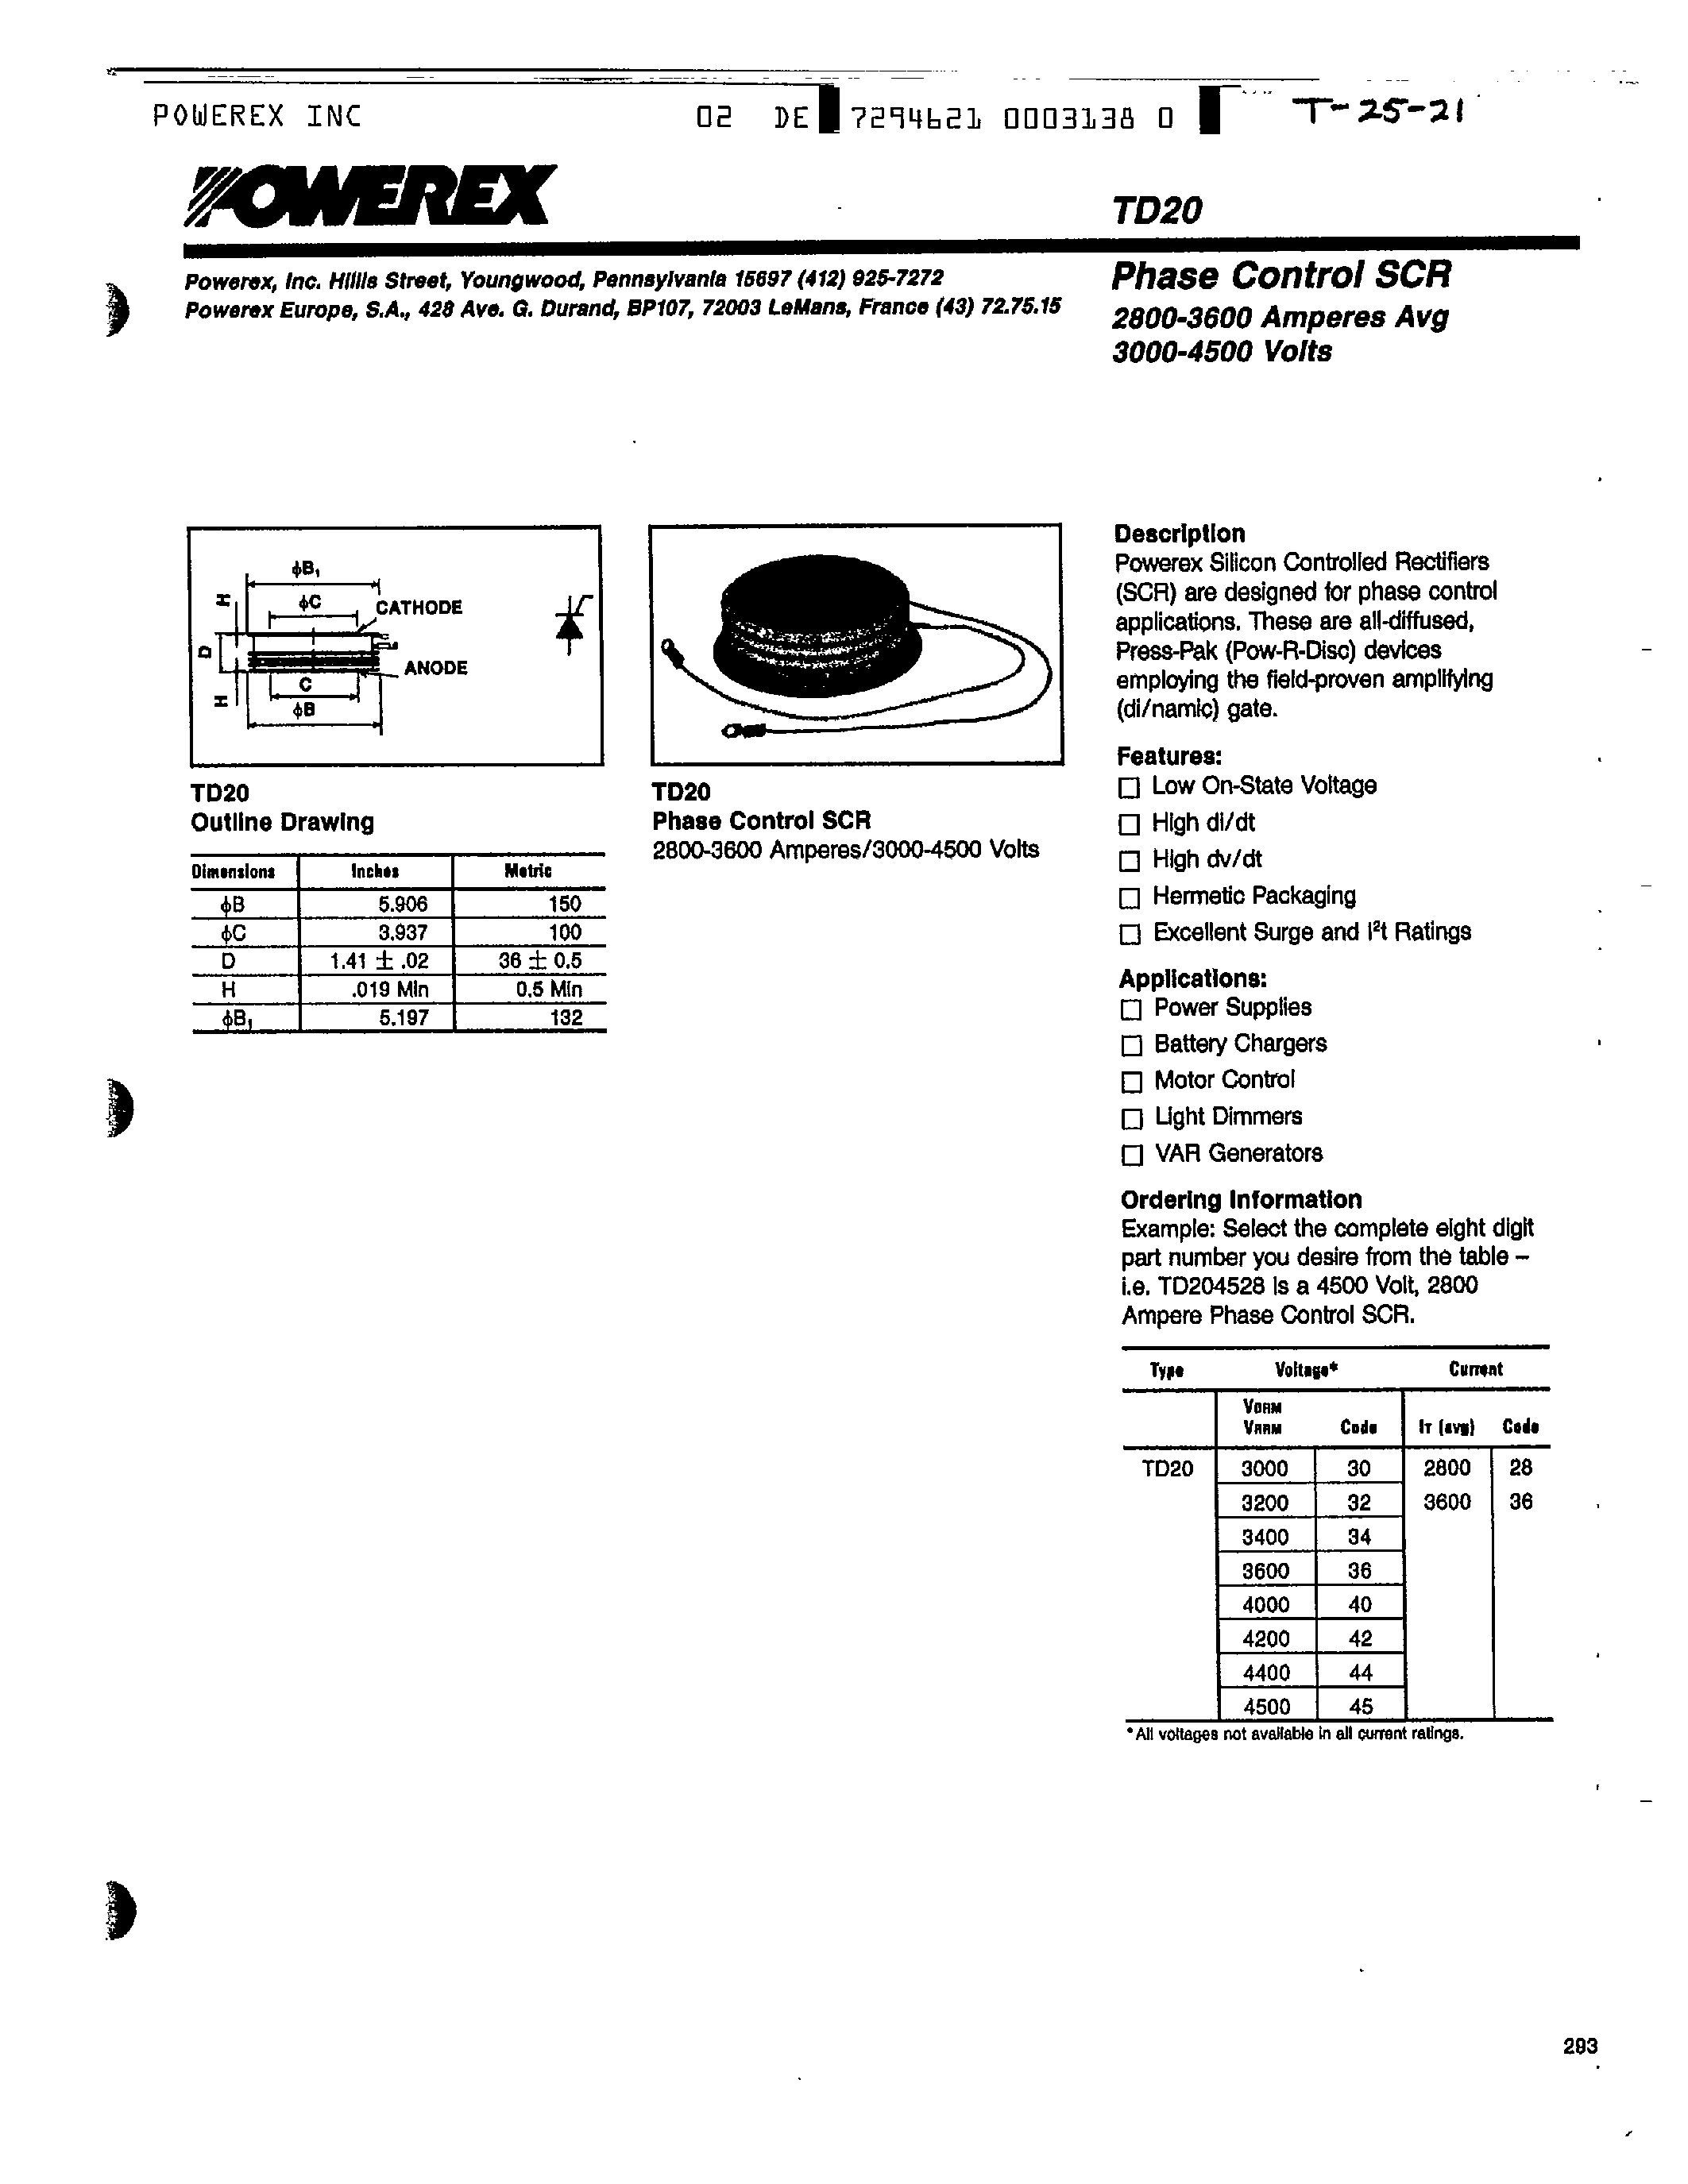 Datasheet TD203028 - Phase Control SCR (2800-3600 Amperes Avg 3000-4500 Volts) page 1